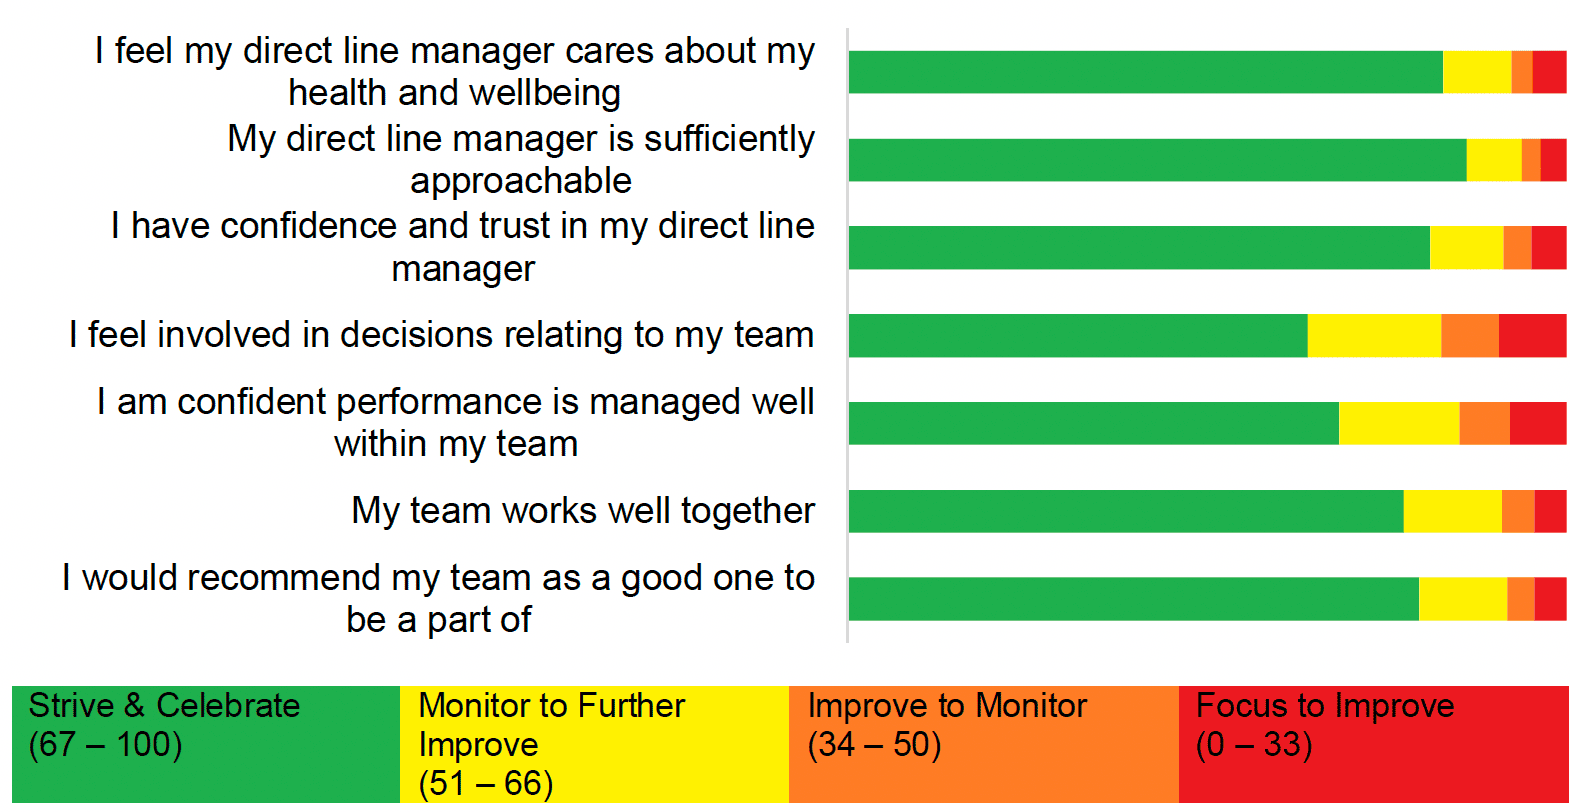 Bar chart showing score distribution for components in My Team/Direct Line Manager, which is detailed in the table following the chart.